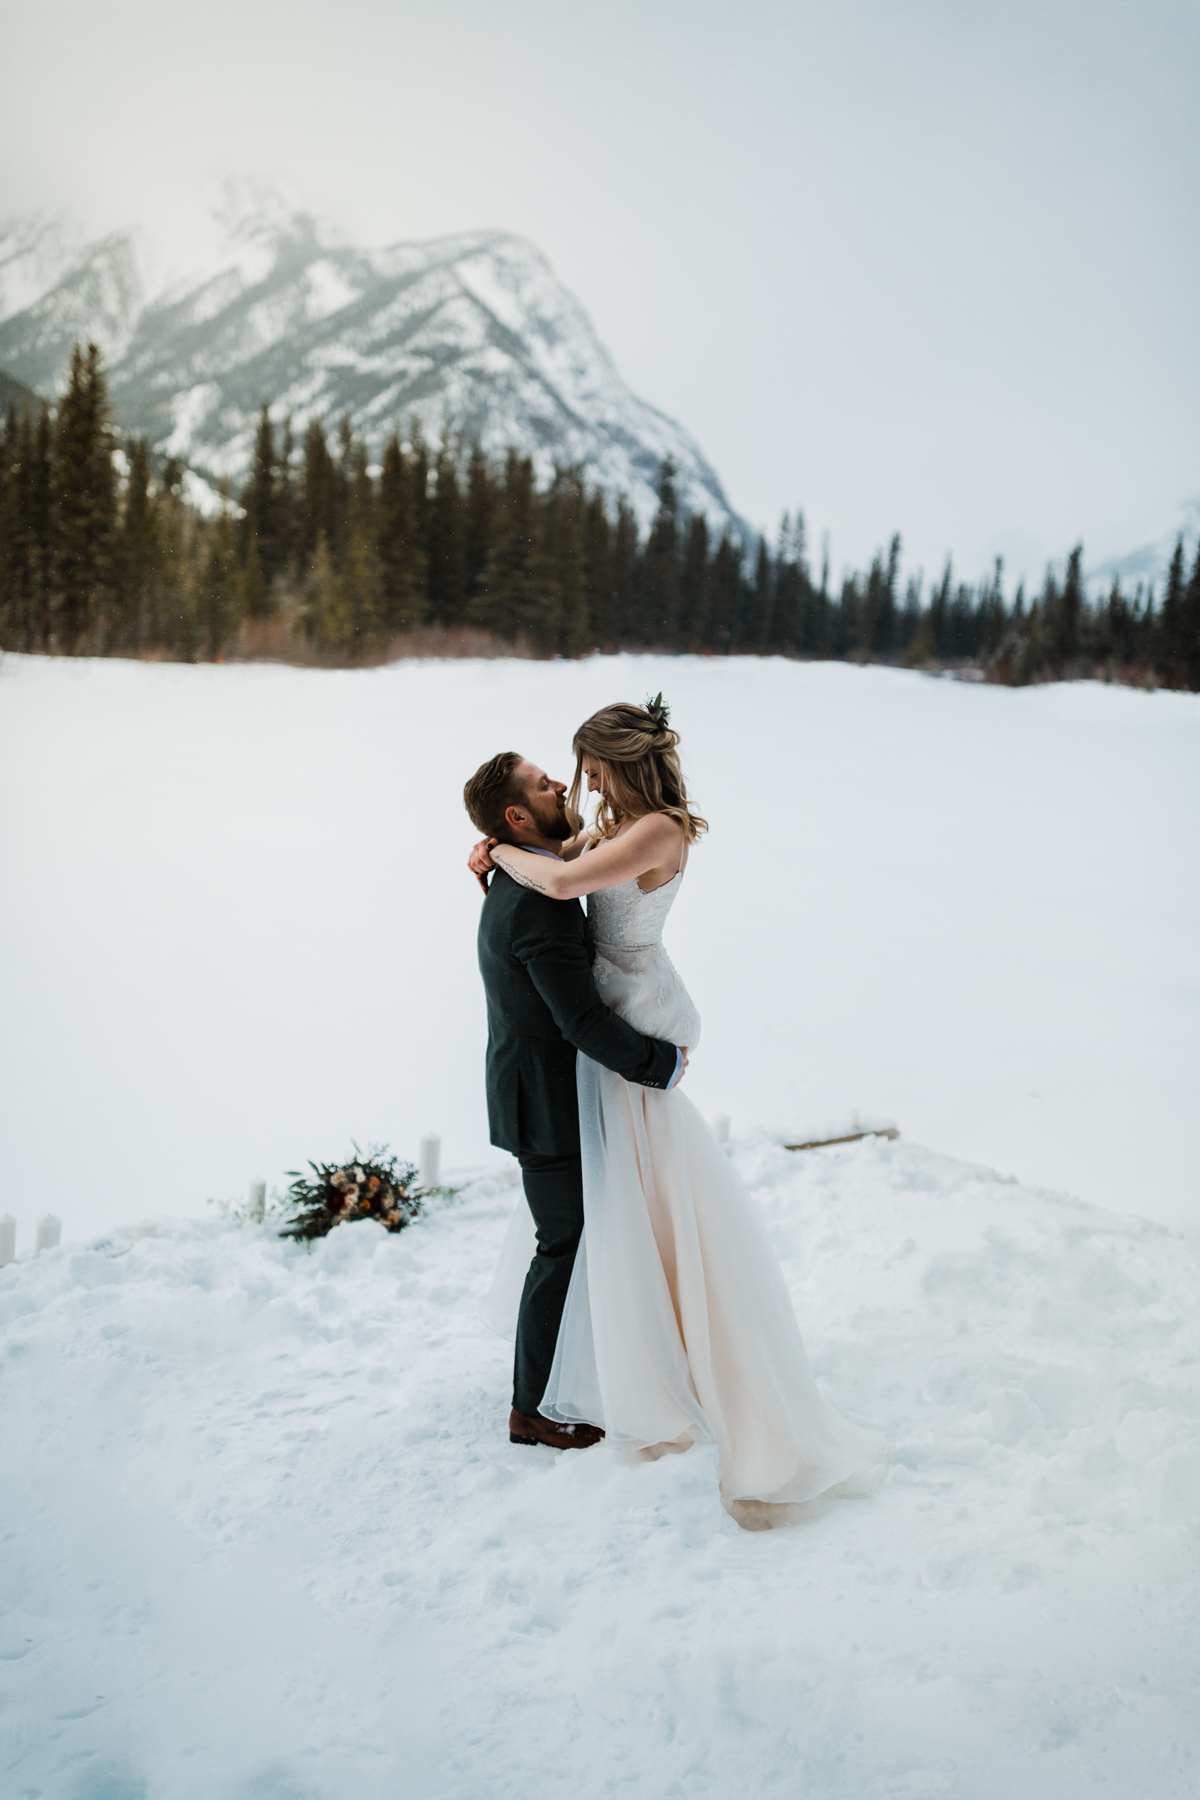 Canmore Elopement Photographer in the Canadian Rockies - Image 36